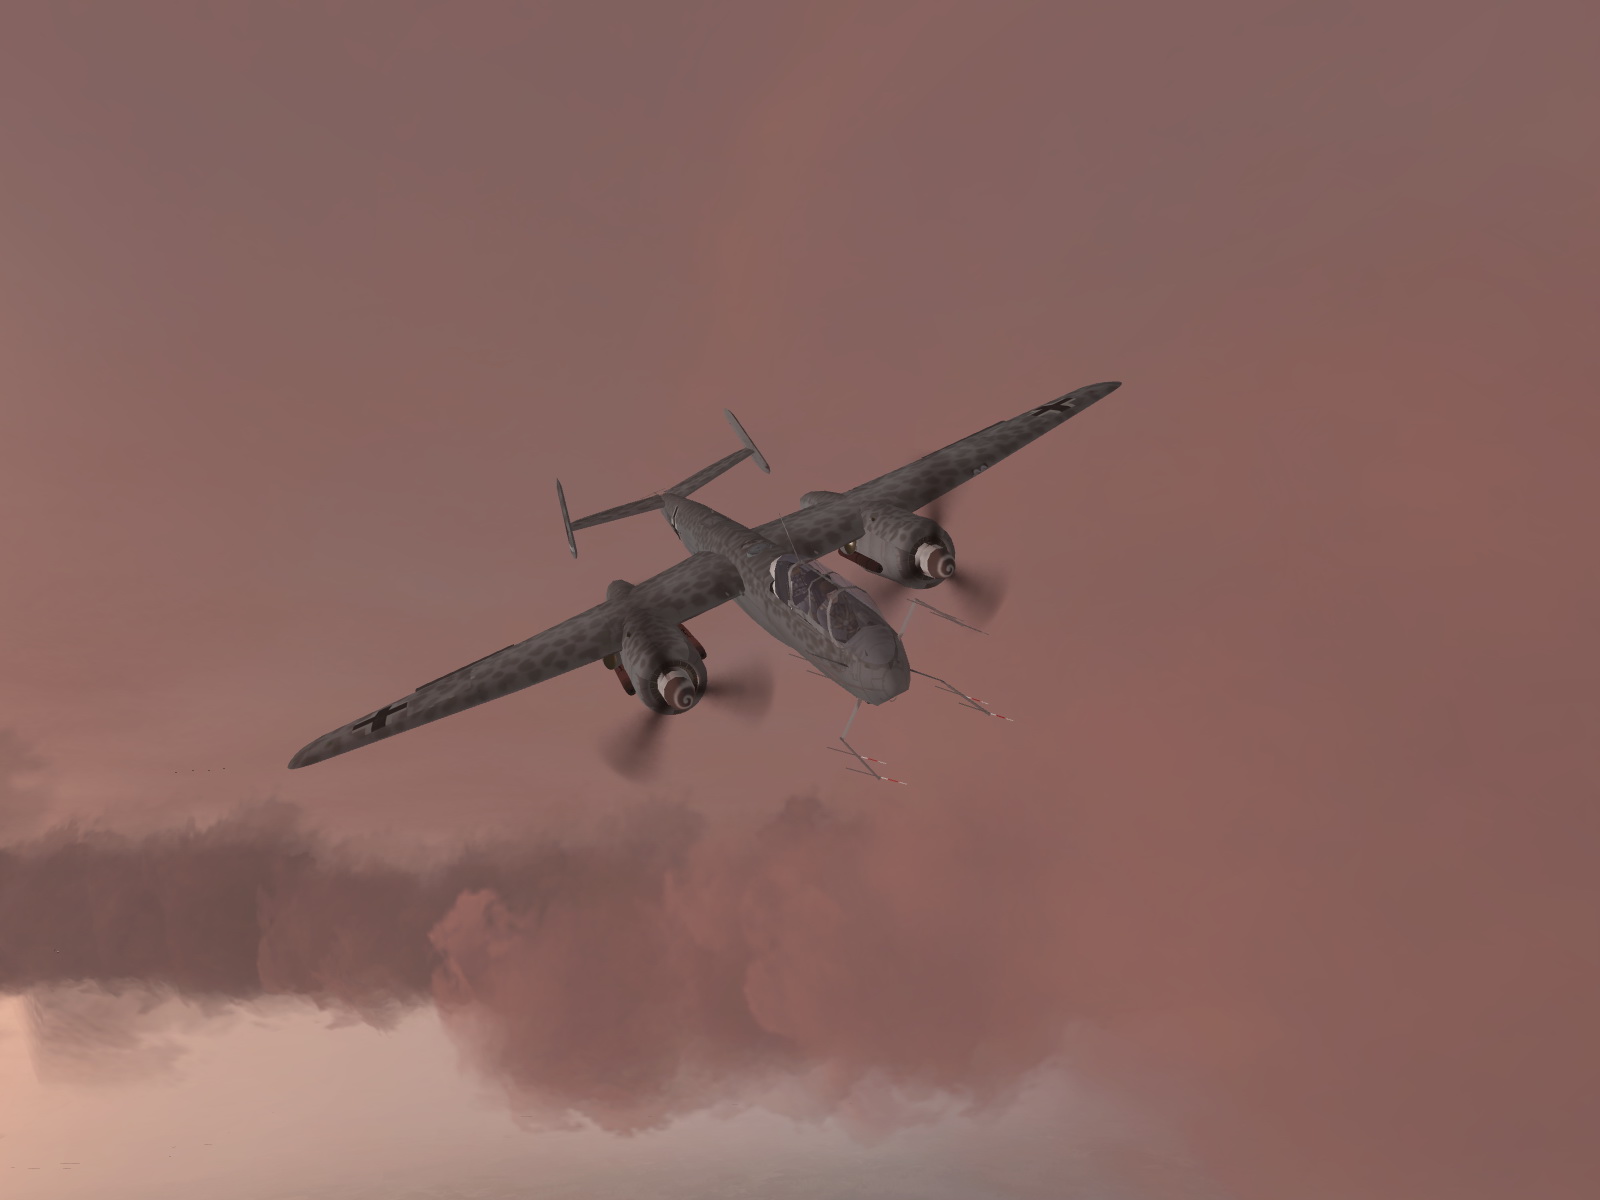 IL2 MH He 219A Nachtjager on dawn patrol over Germany 04